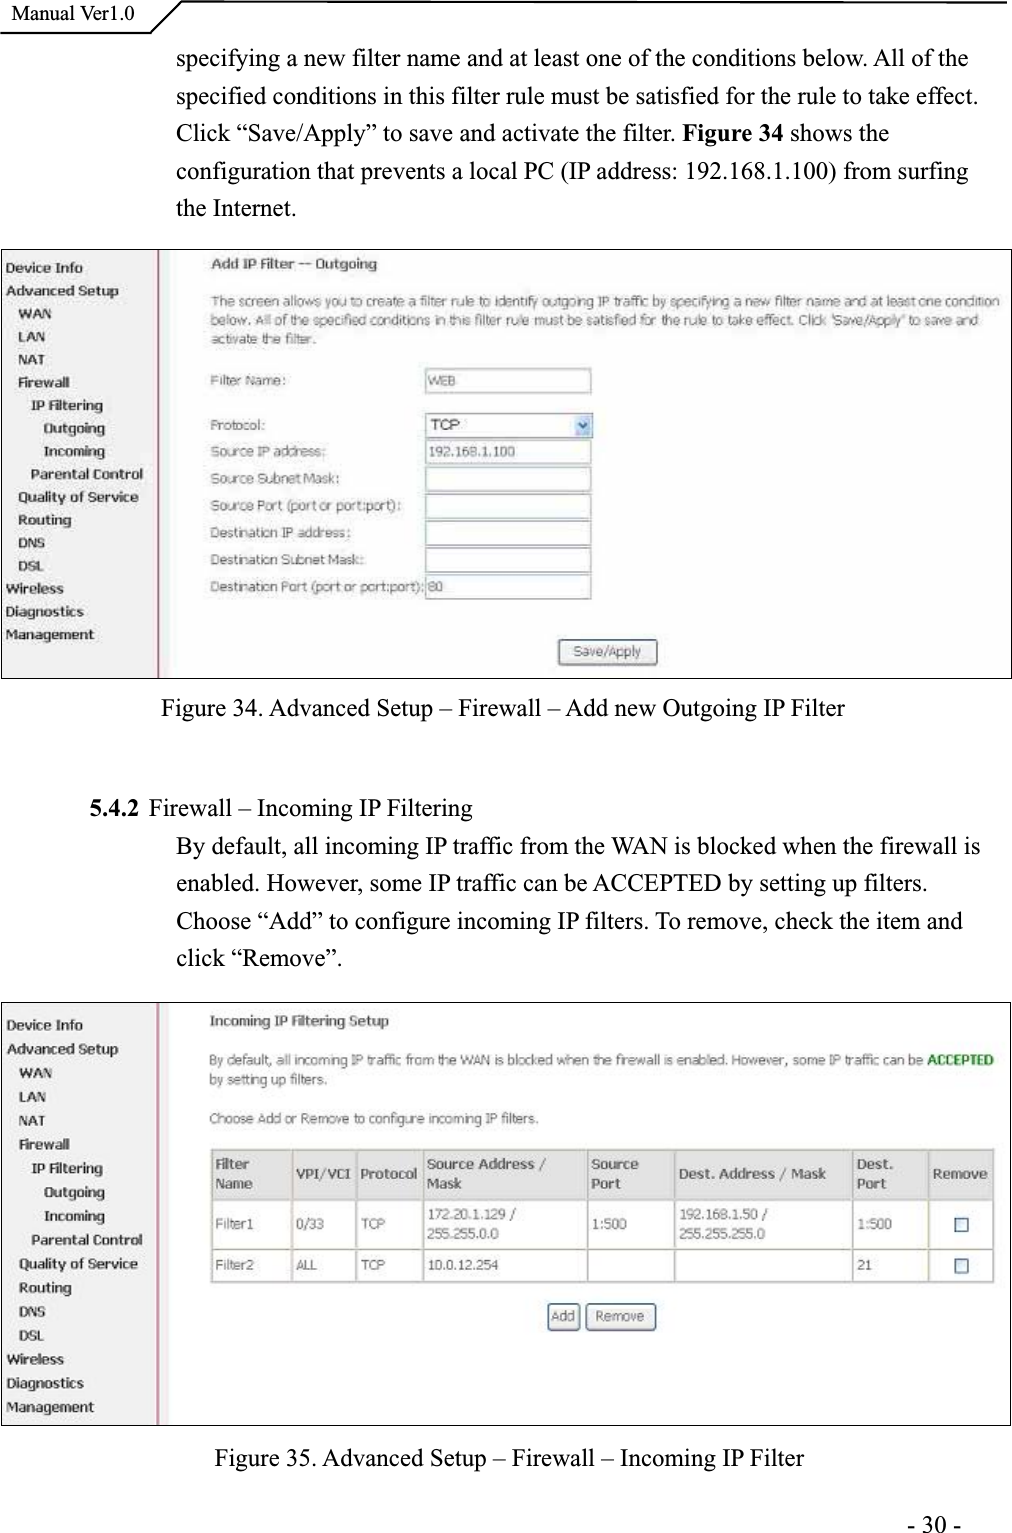  Manual Ver1.0specifying a new filter name and at least one of the conditions below. All of the specified conditions in this filter rule must be satisfied for the rule to take effect.Click “Save/Apply” to save and activate the filter. Figure 34 shows the configuration that prevents a local PC (IP address: 192.168.1.100) from surfingthe Internet.Figure 34. Advanced Setup – Firewall – Add new Outgoing IP Filter 5.4.2 Firewall – Incoming IP FilteringBy default, all incoming IP traffic from the WAN is blocked when the firewall is enabled. However, some IP traffic can be ACCEPTED by setting up filters.Choose “Add” to configure incoming IP filters. To remove, check the item and click “Remove”.Figure 35. Advanced Setup – Firewall – Incoming IP Filter                                                                      -30-